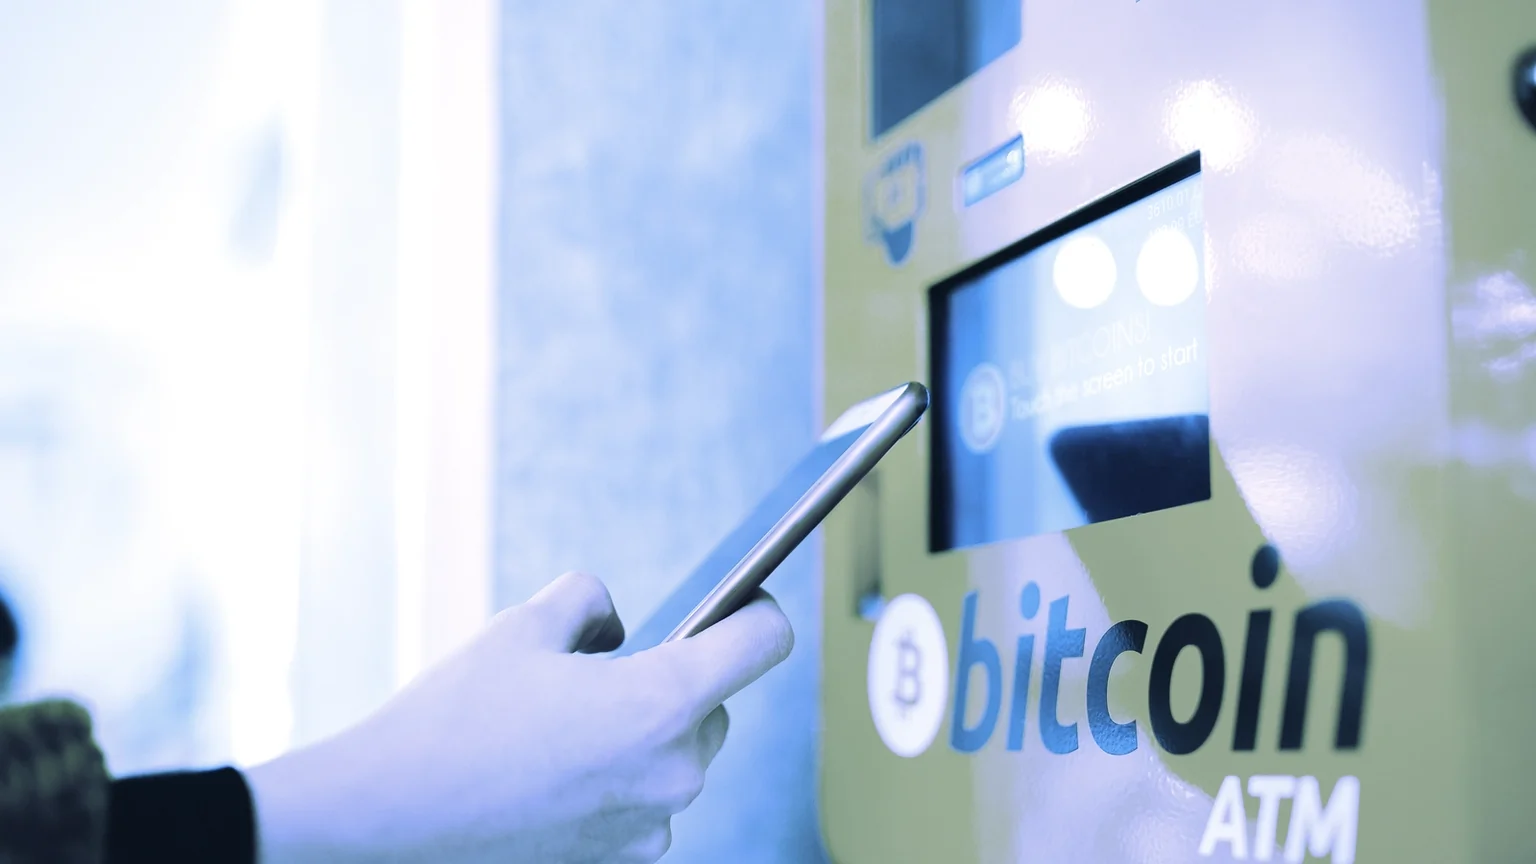 Bitcoin ATMs let users buy and sell Bitcoin for cash. Image: Shutterstock